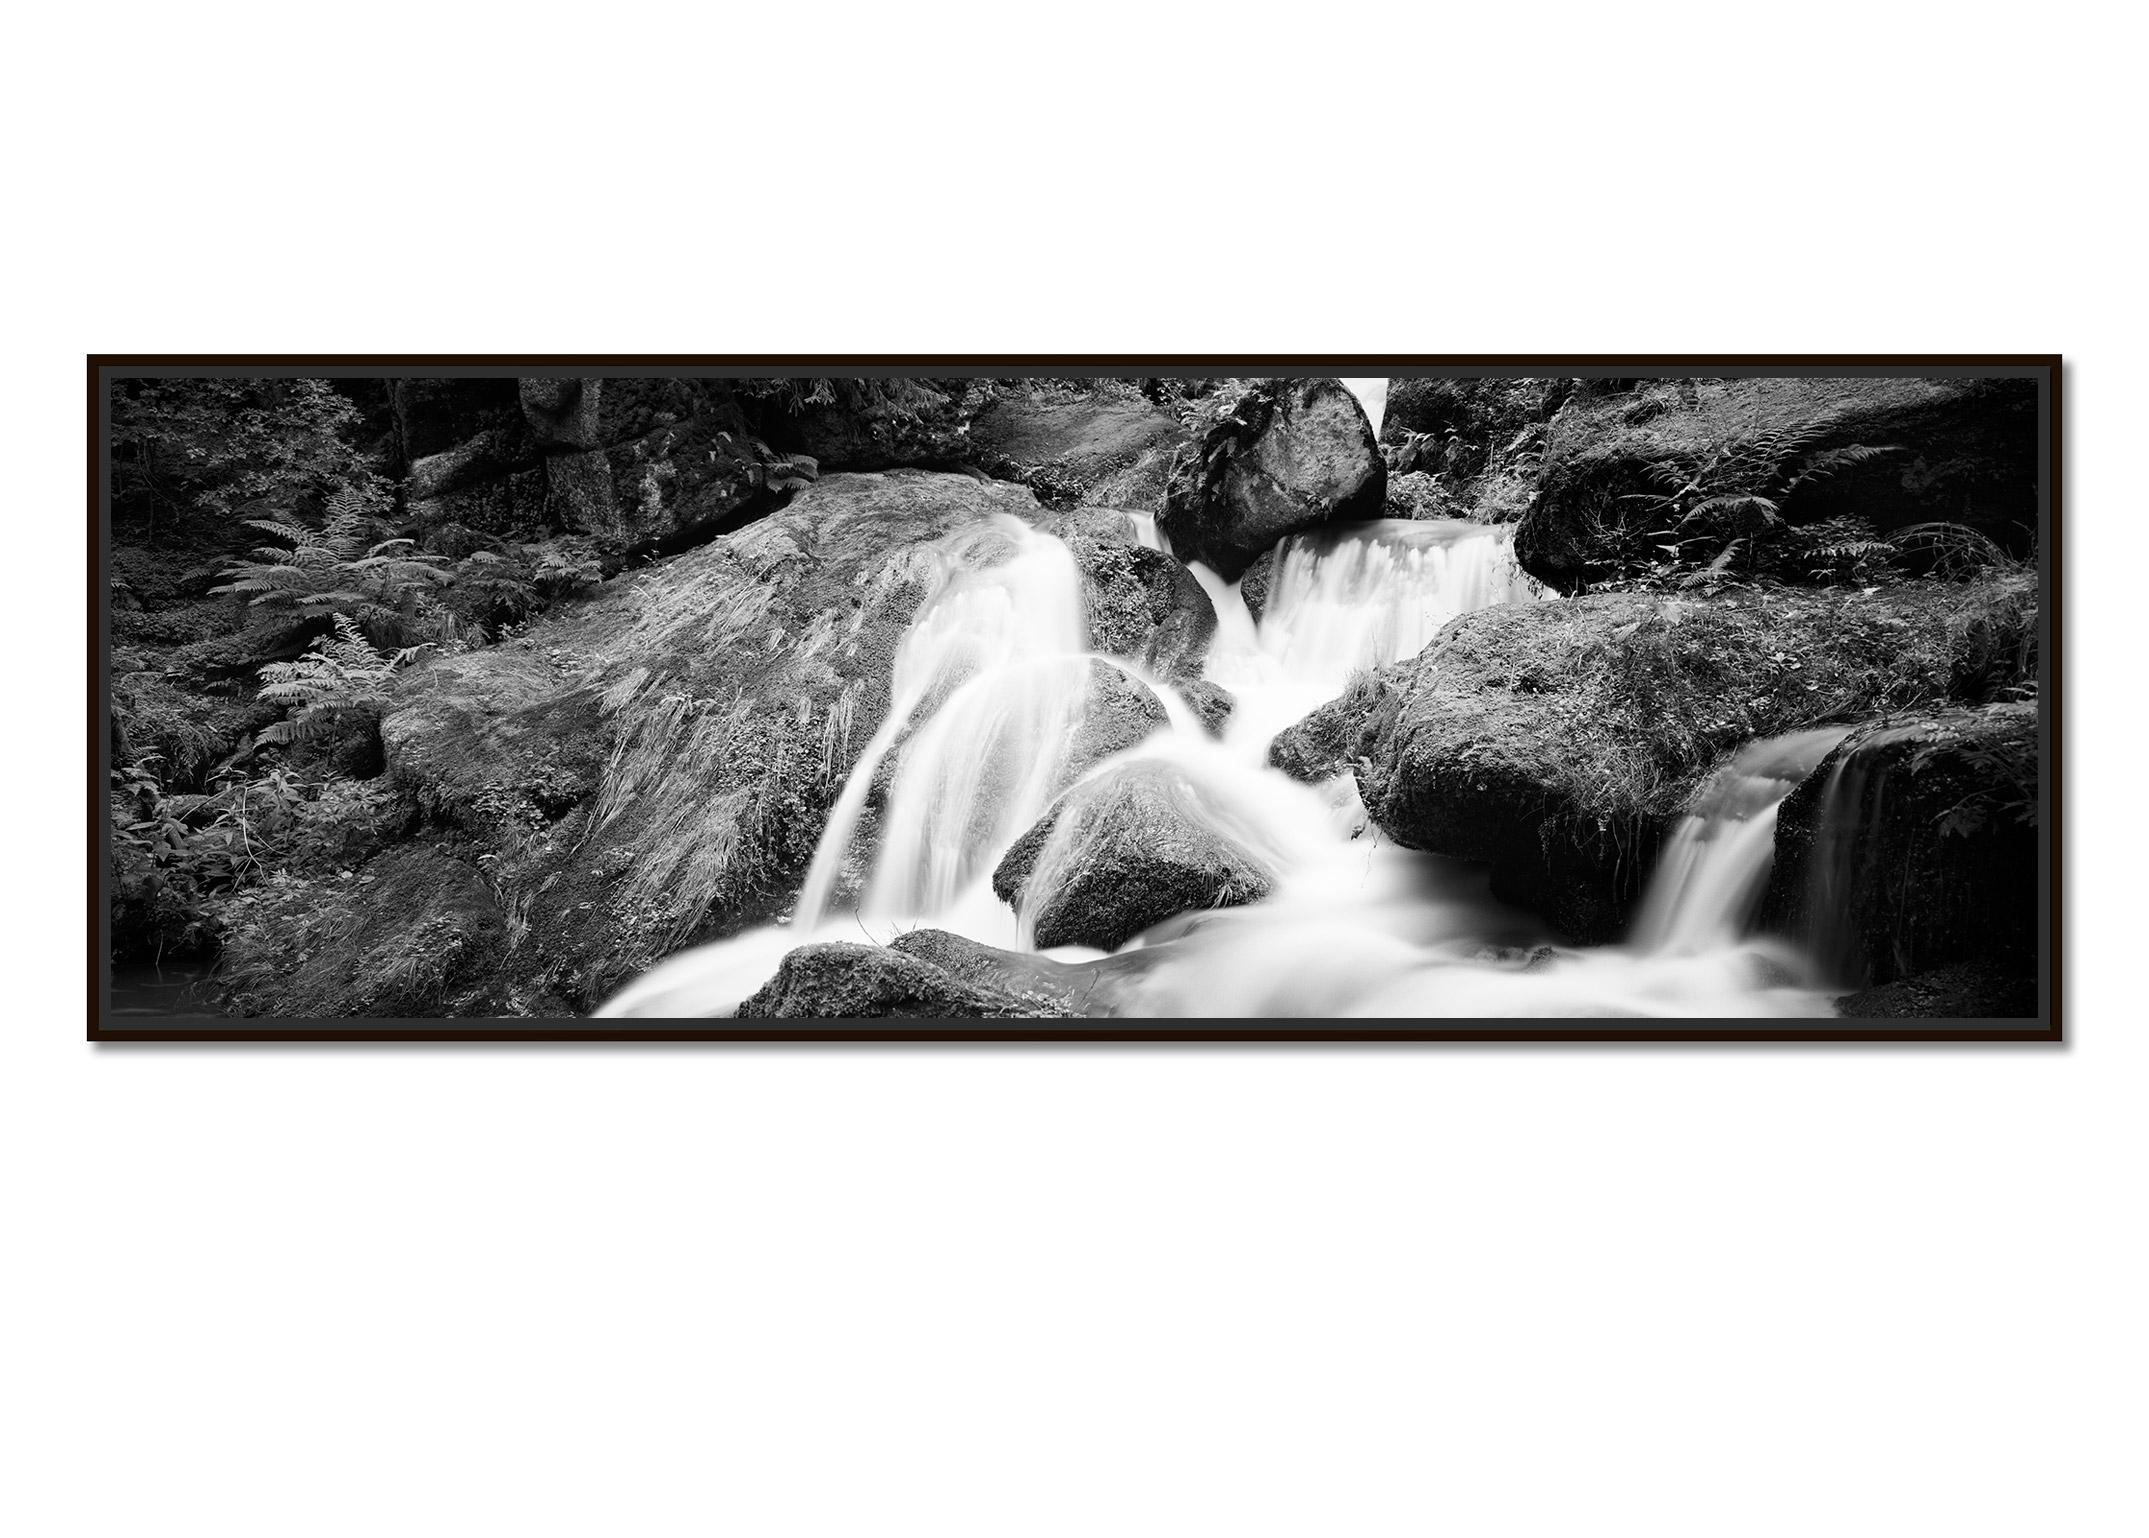 Mountain Stream, Panorama, Austria, minimalist black and white art waterscape - Photograph by Gerald Berghammer